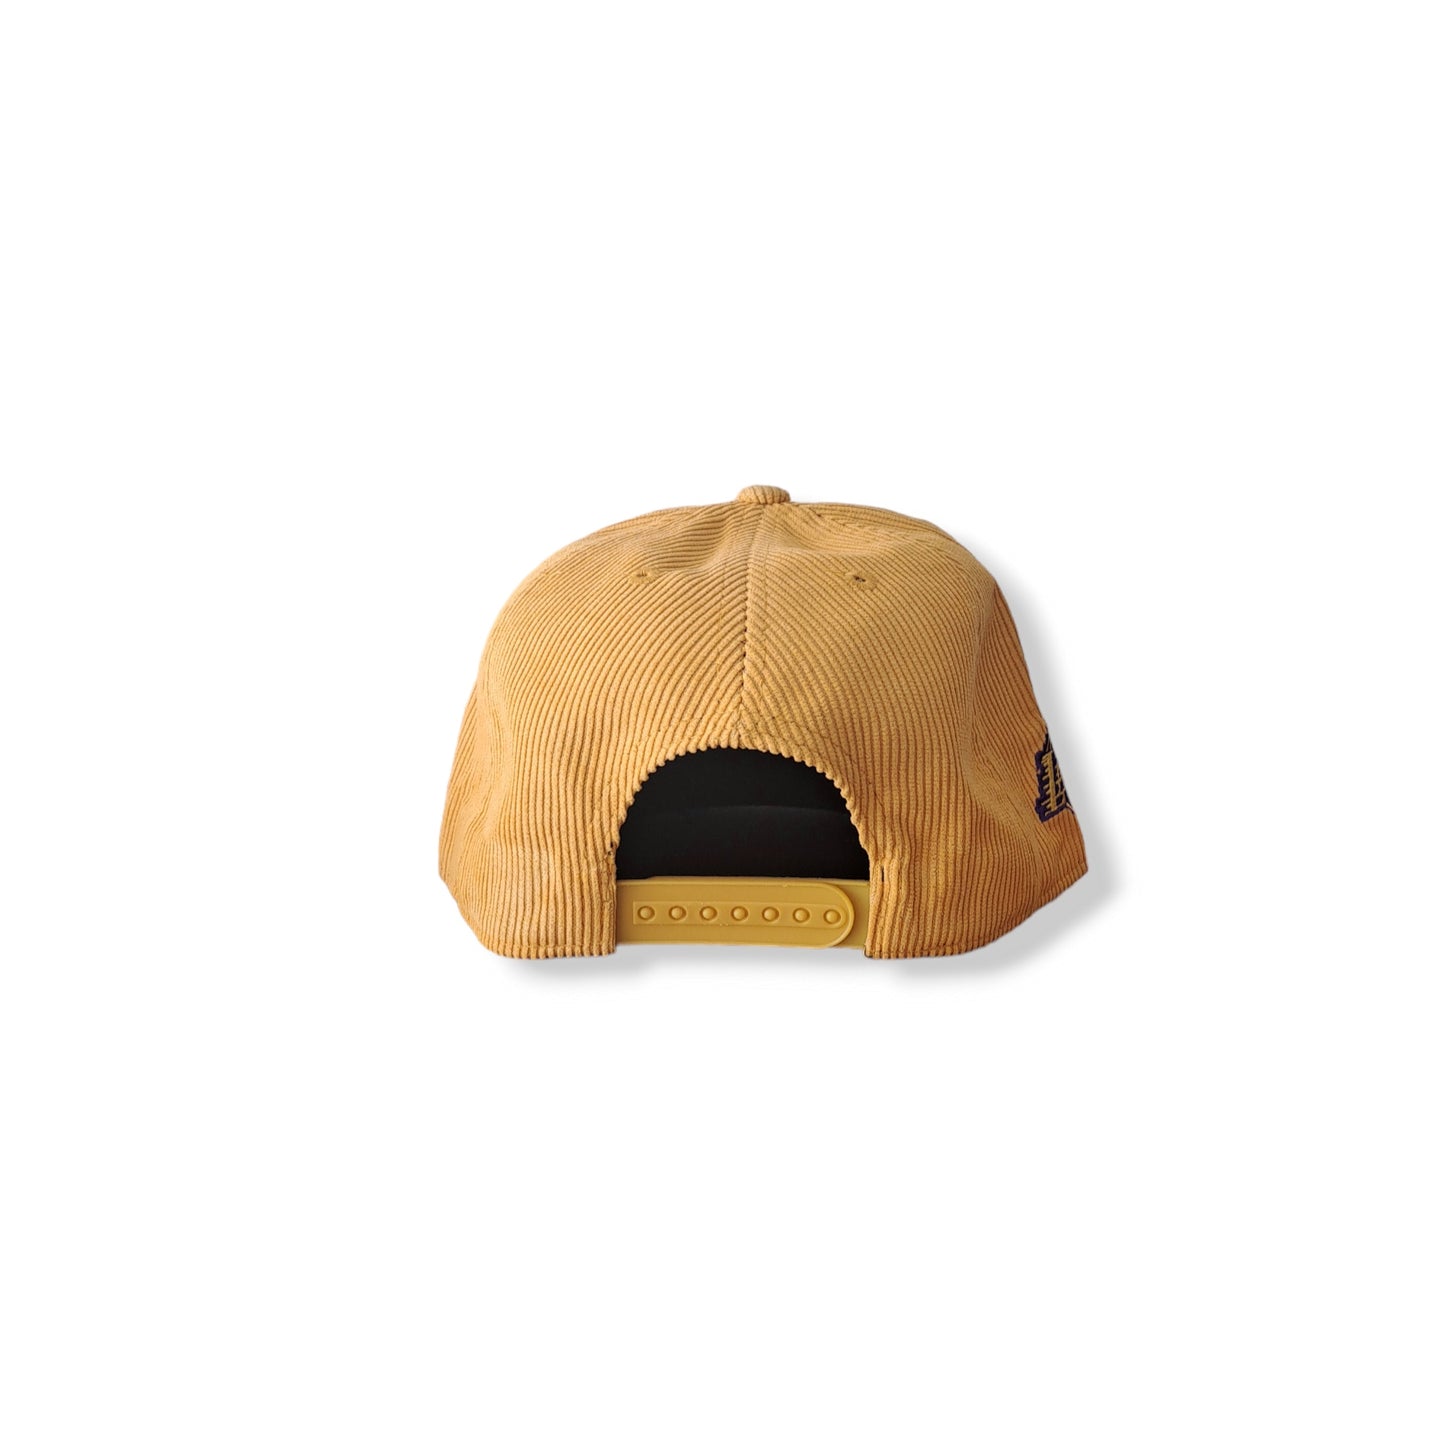 SOLD OUT | Classic Lakers Cap